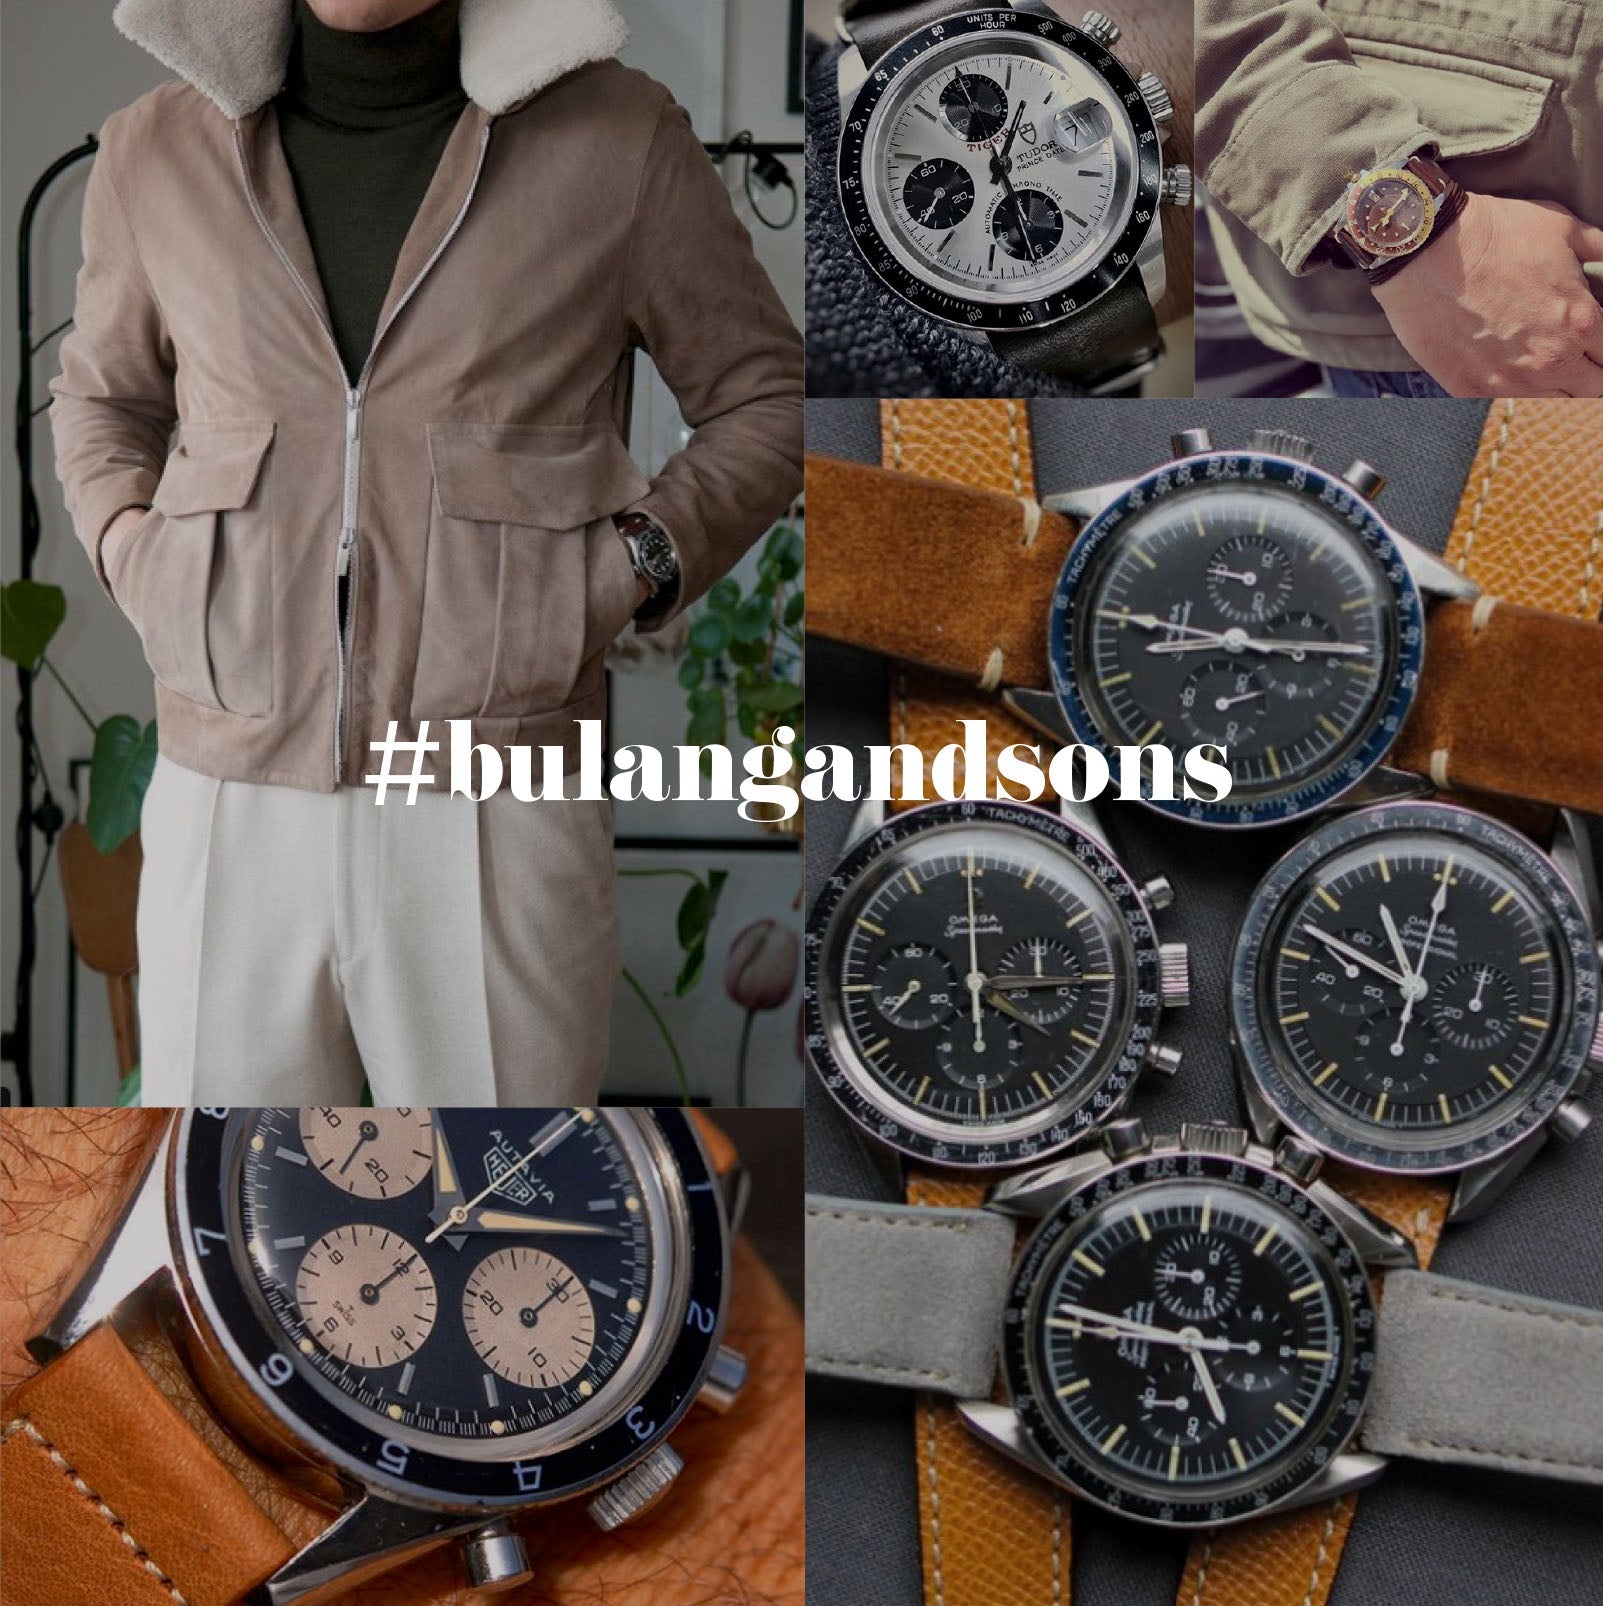 #bulangandsons - join the family